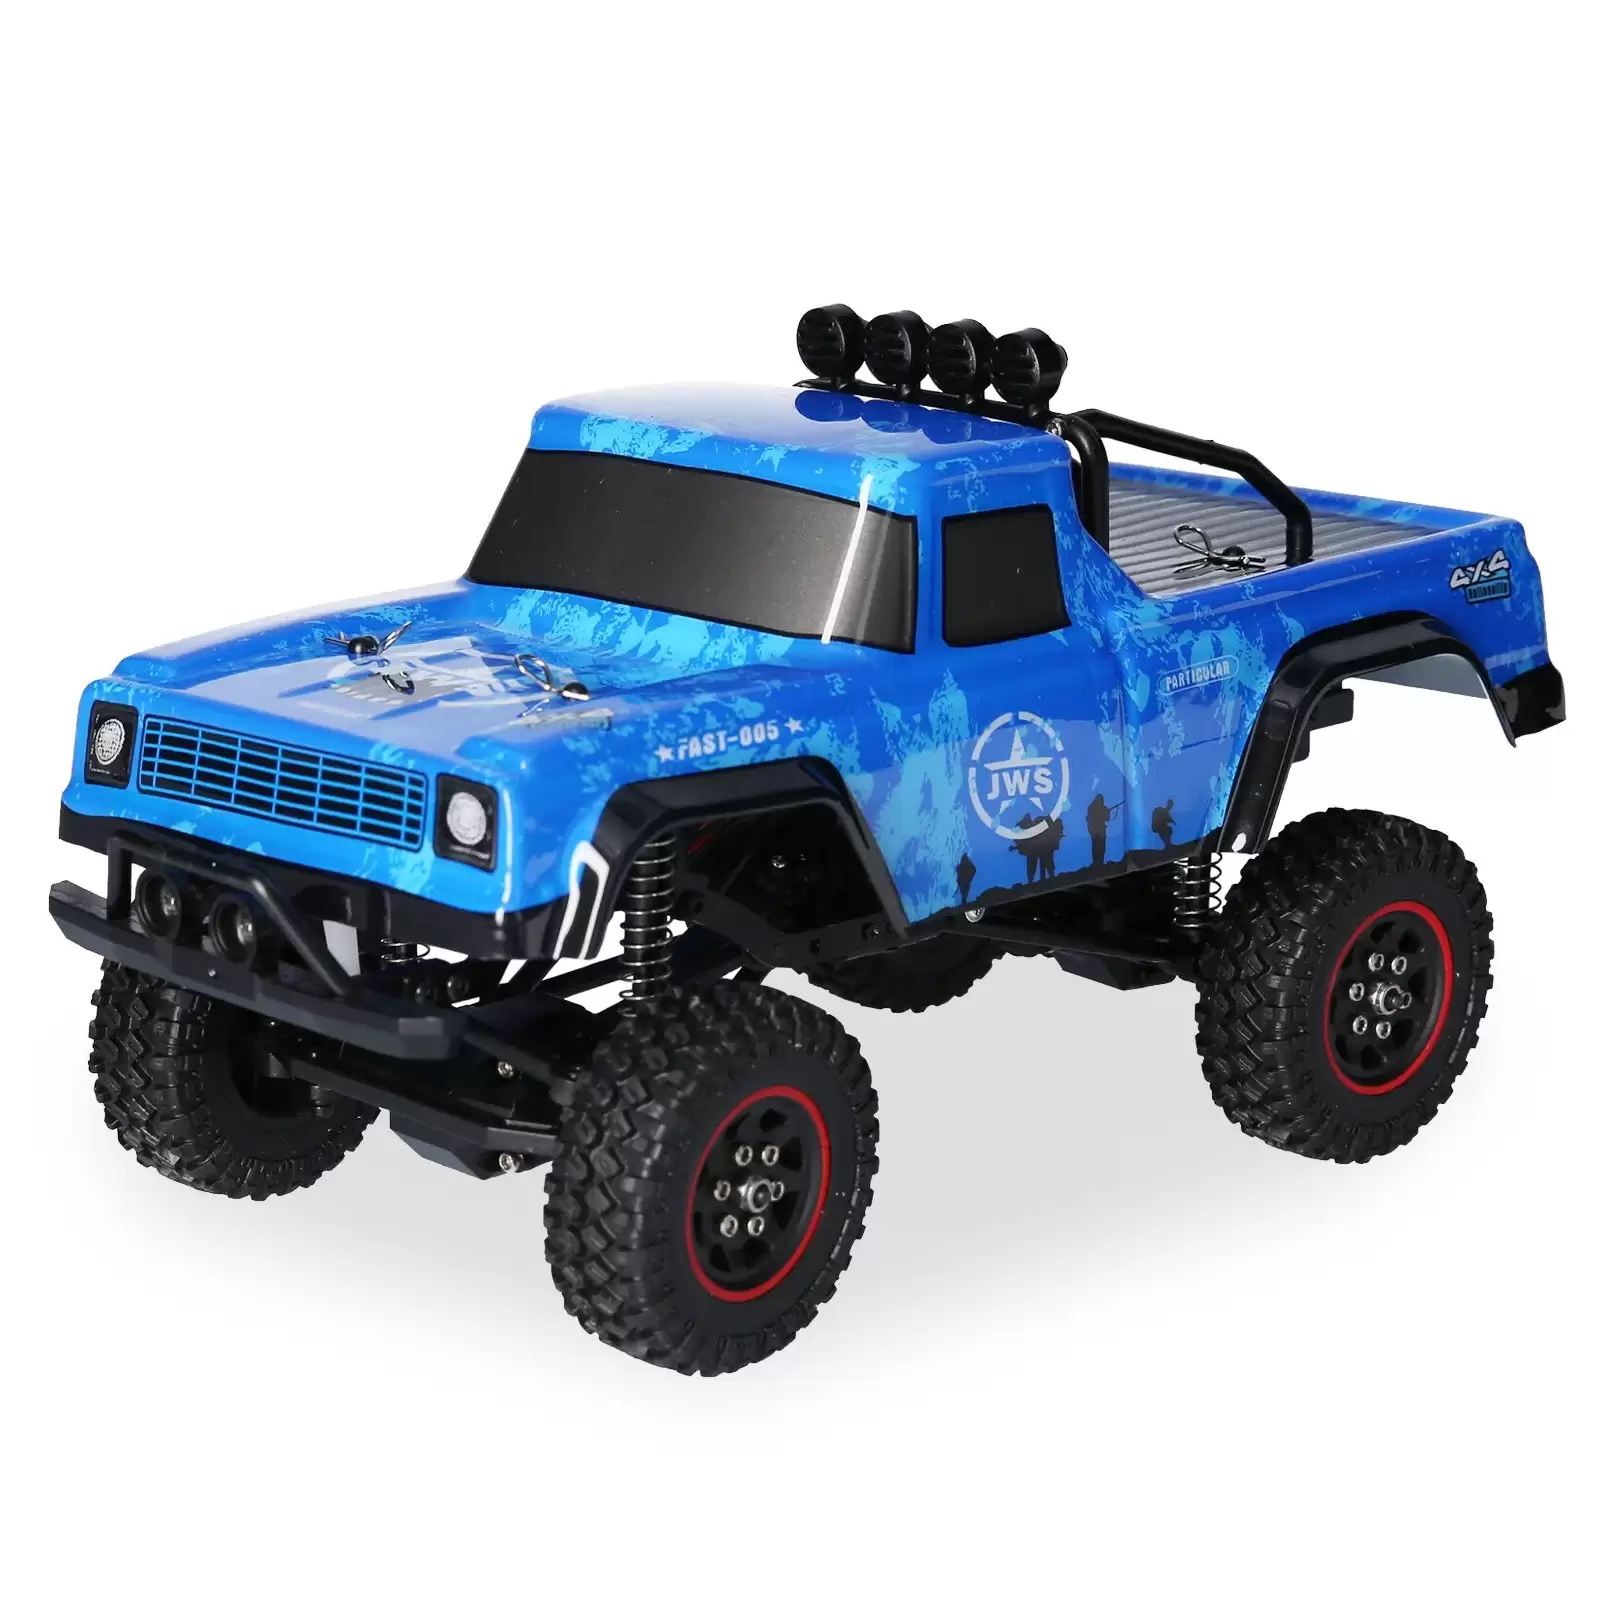 Order In Just $59.99 Get 54% Discount On Ax-8801 1/18 Scale 4wd 2.4g Remote Control Crawler Off Road Truck With This Discount Coupon At Tomtop